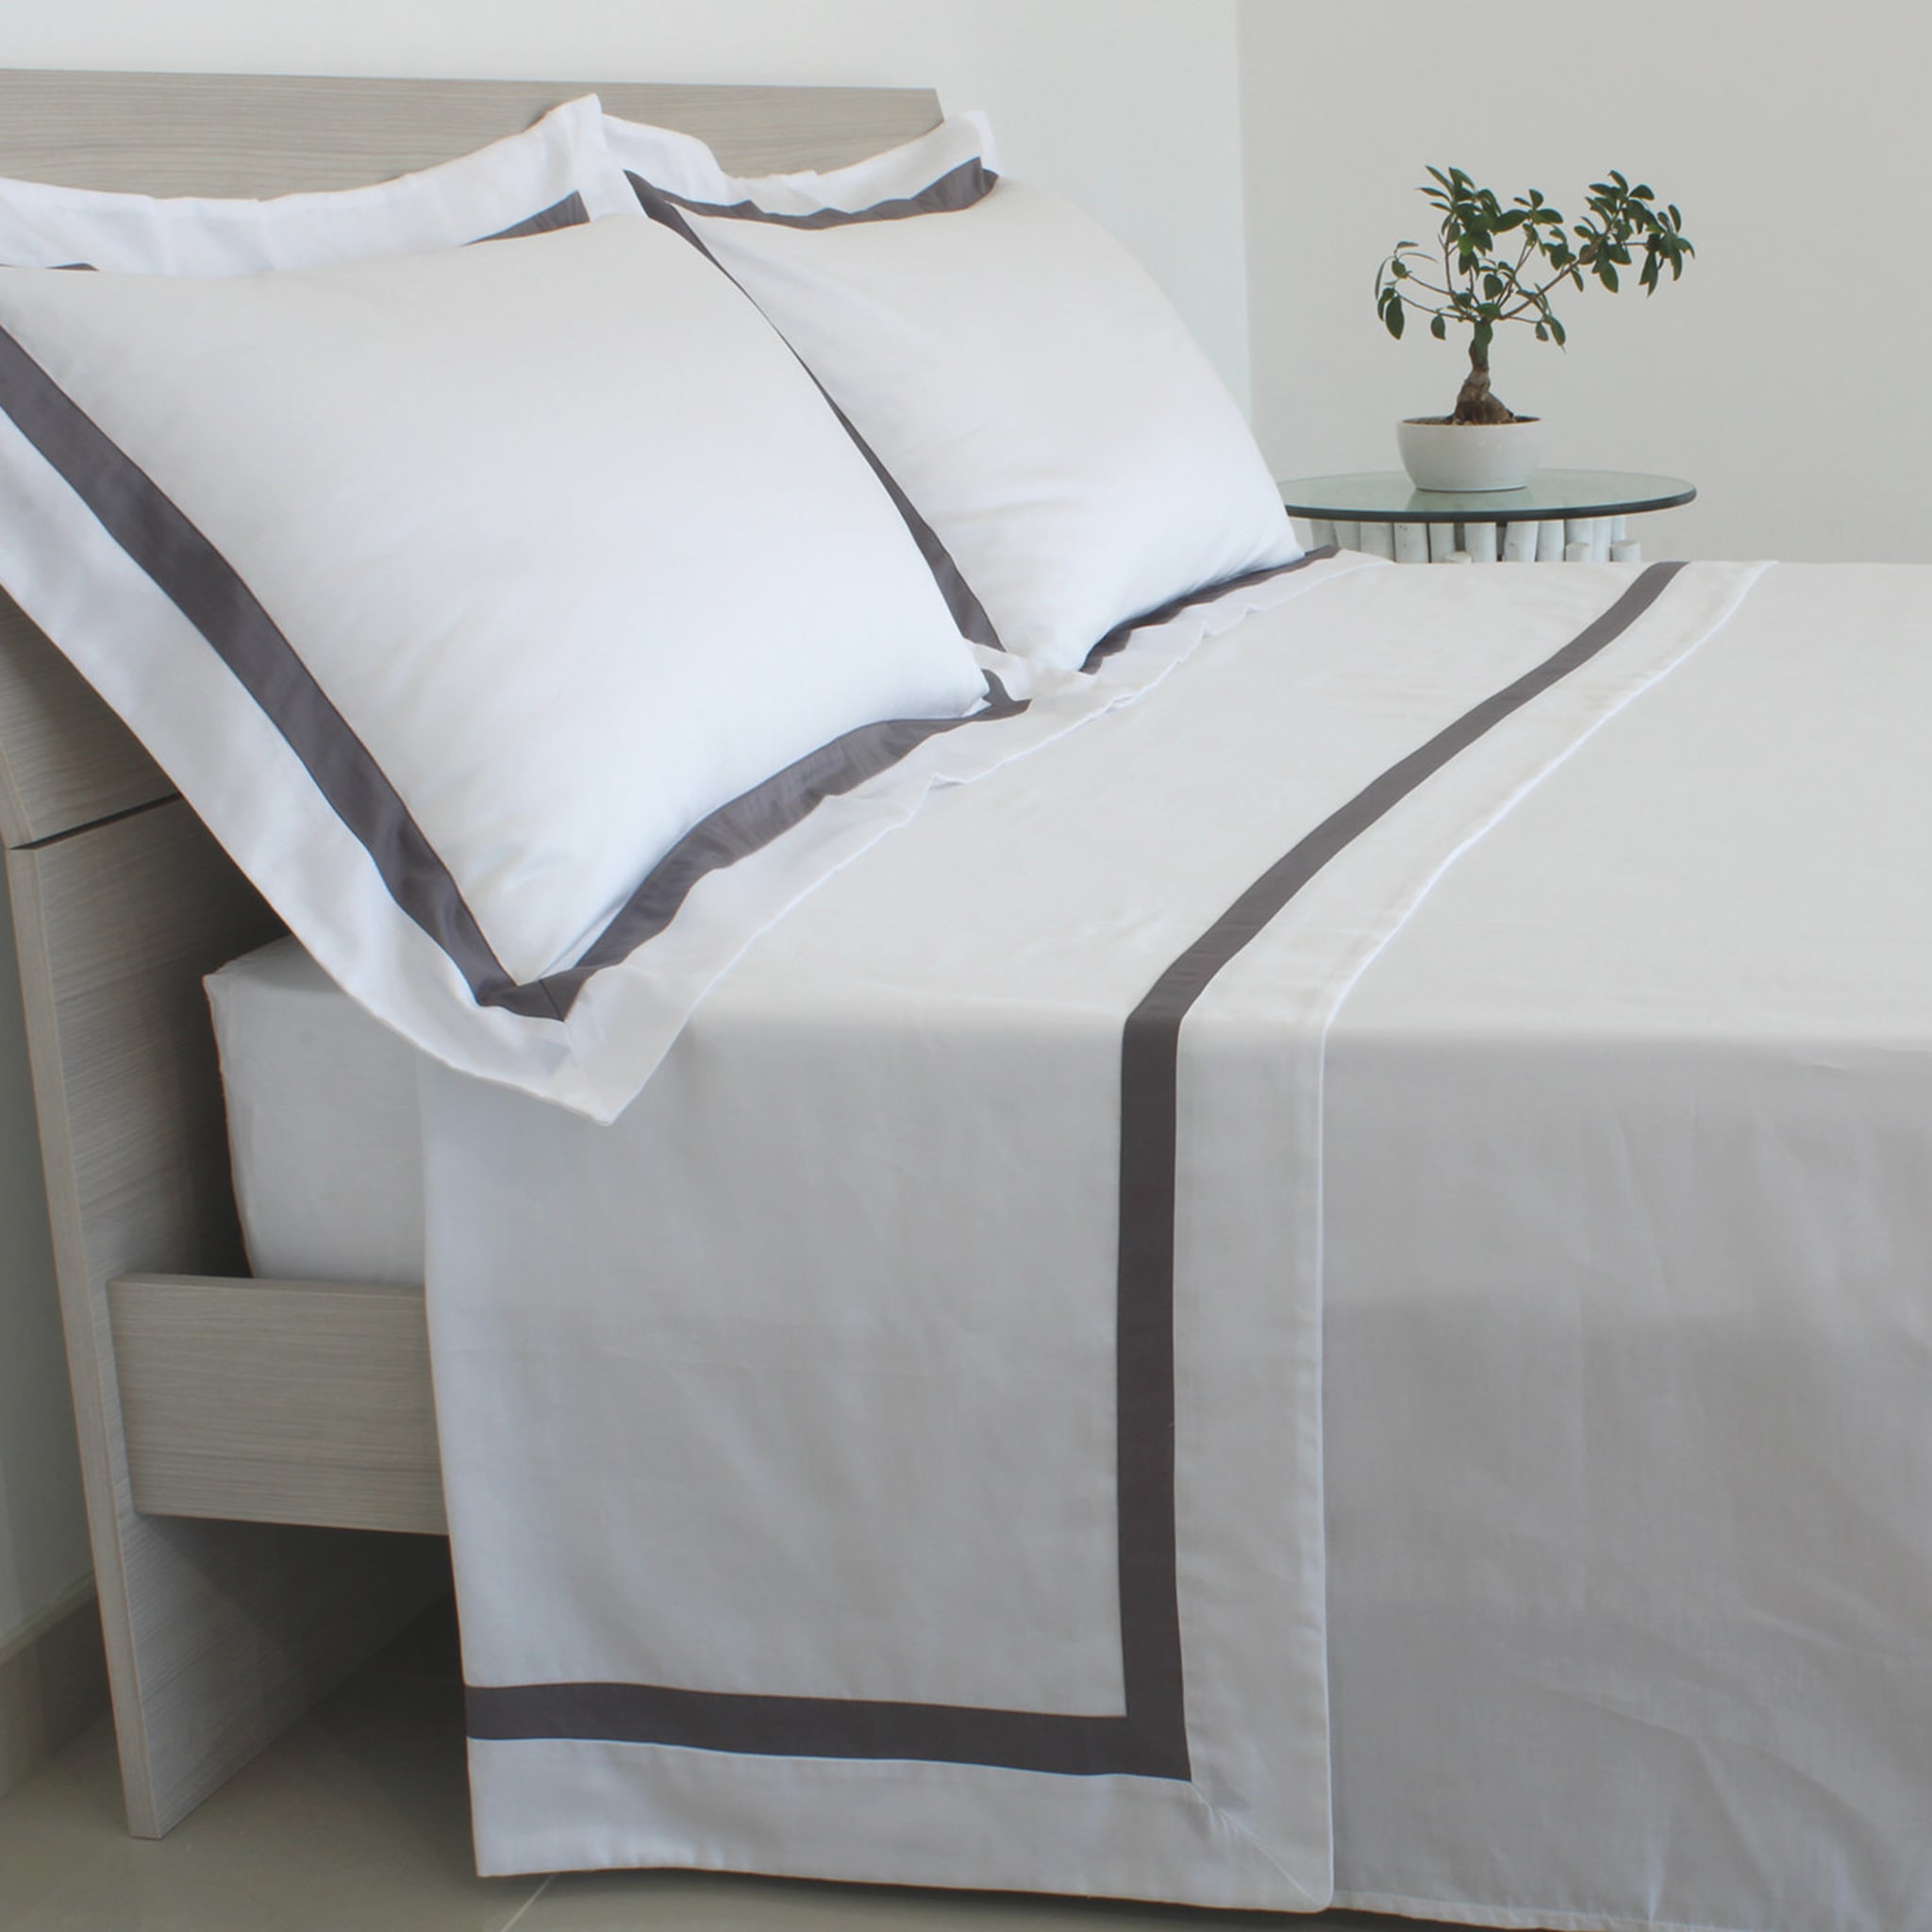 Purity King Size Sheet Set with Pillowcases - Alternative view 1